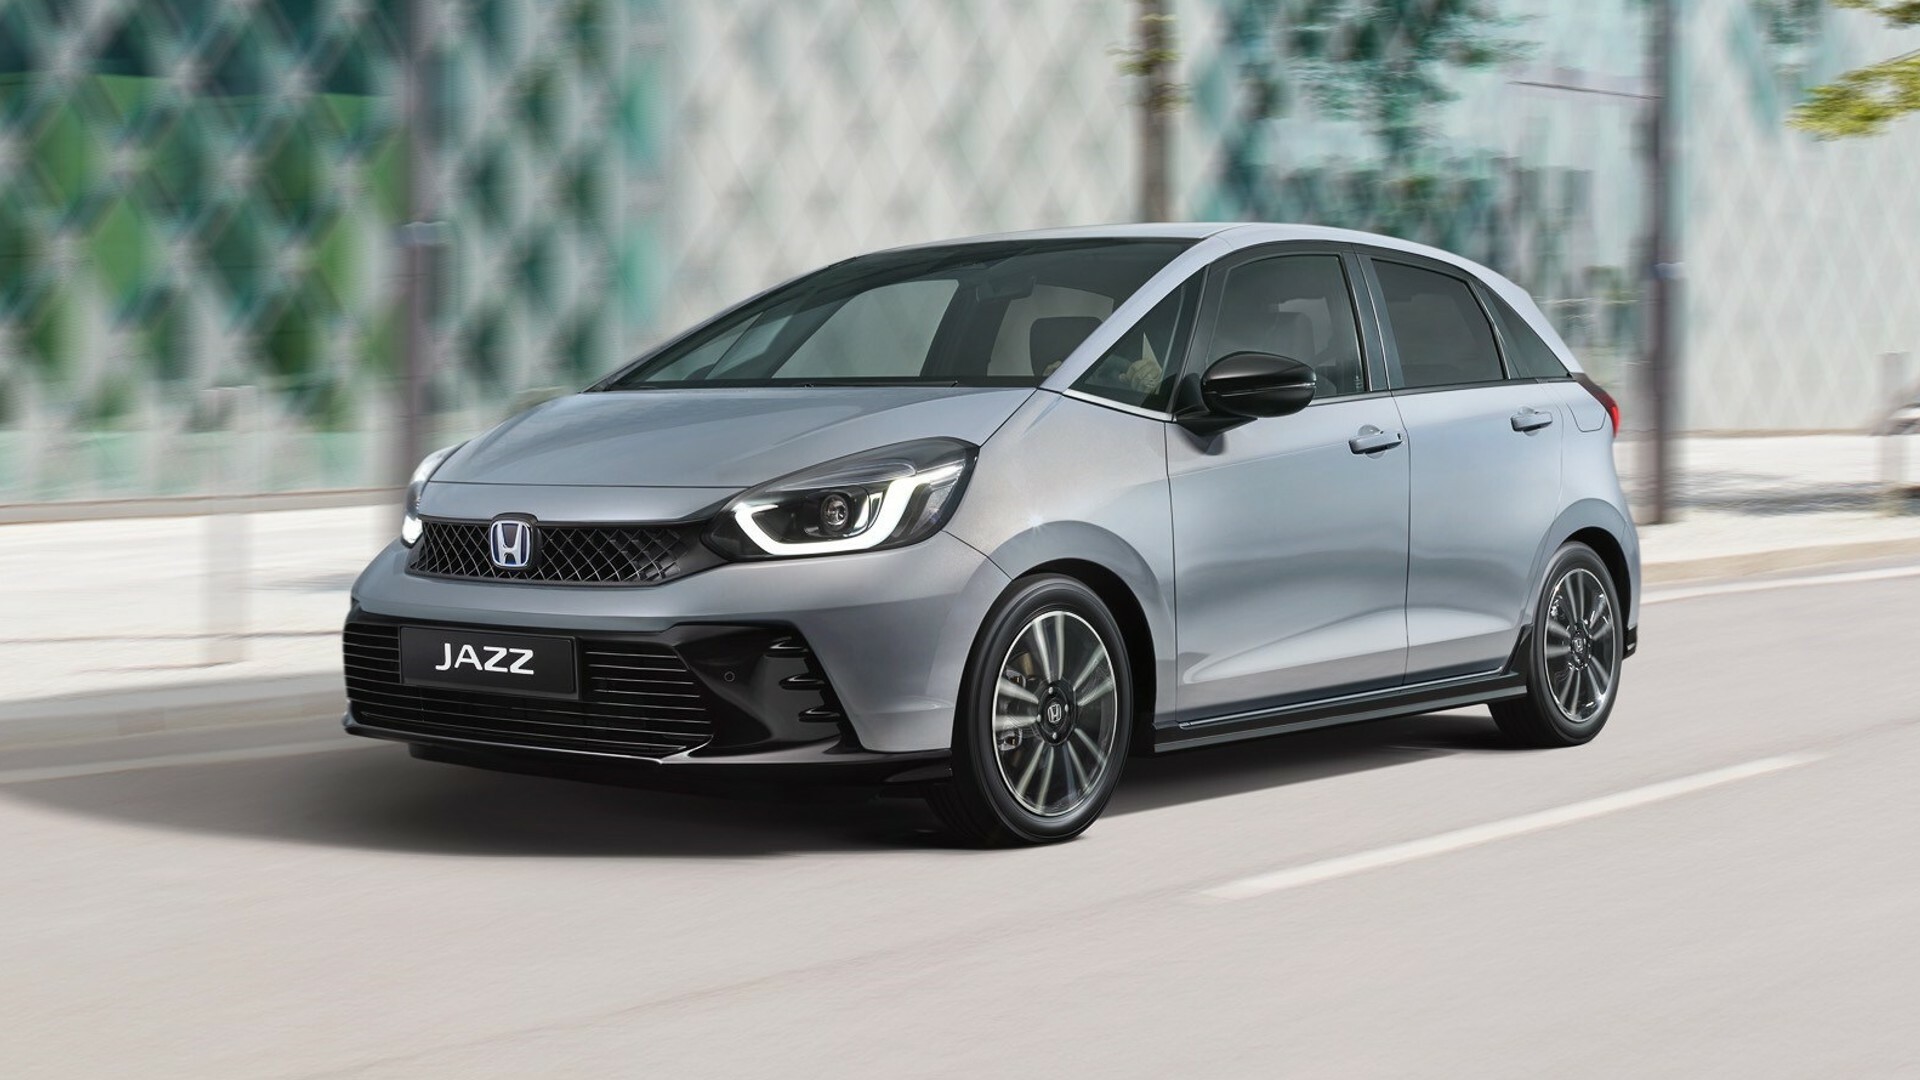 Facelifted Honda Jazz e:HEV Arrives In Europe With More Power And